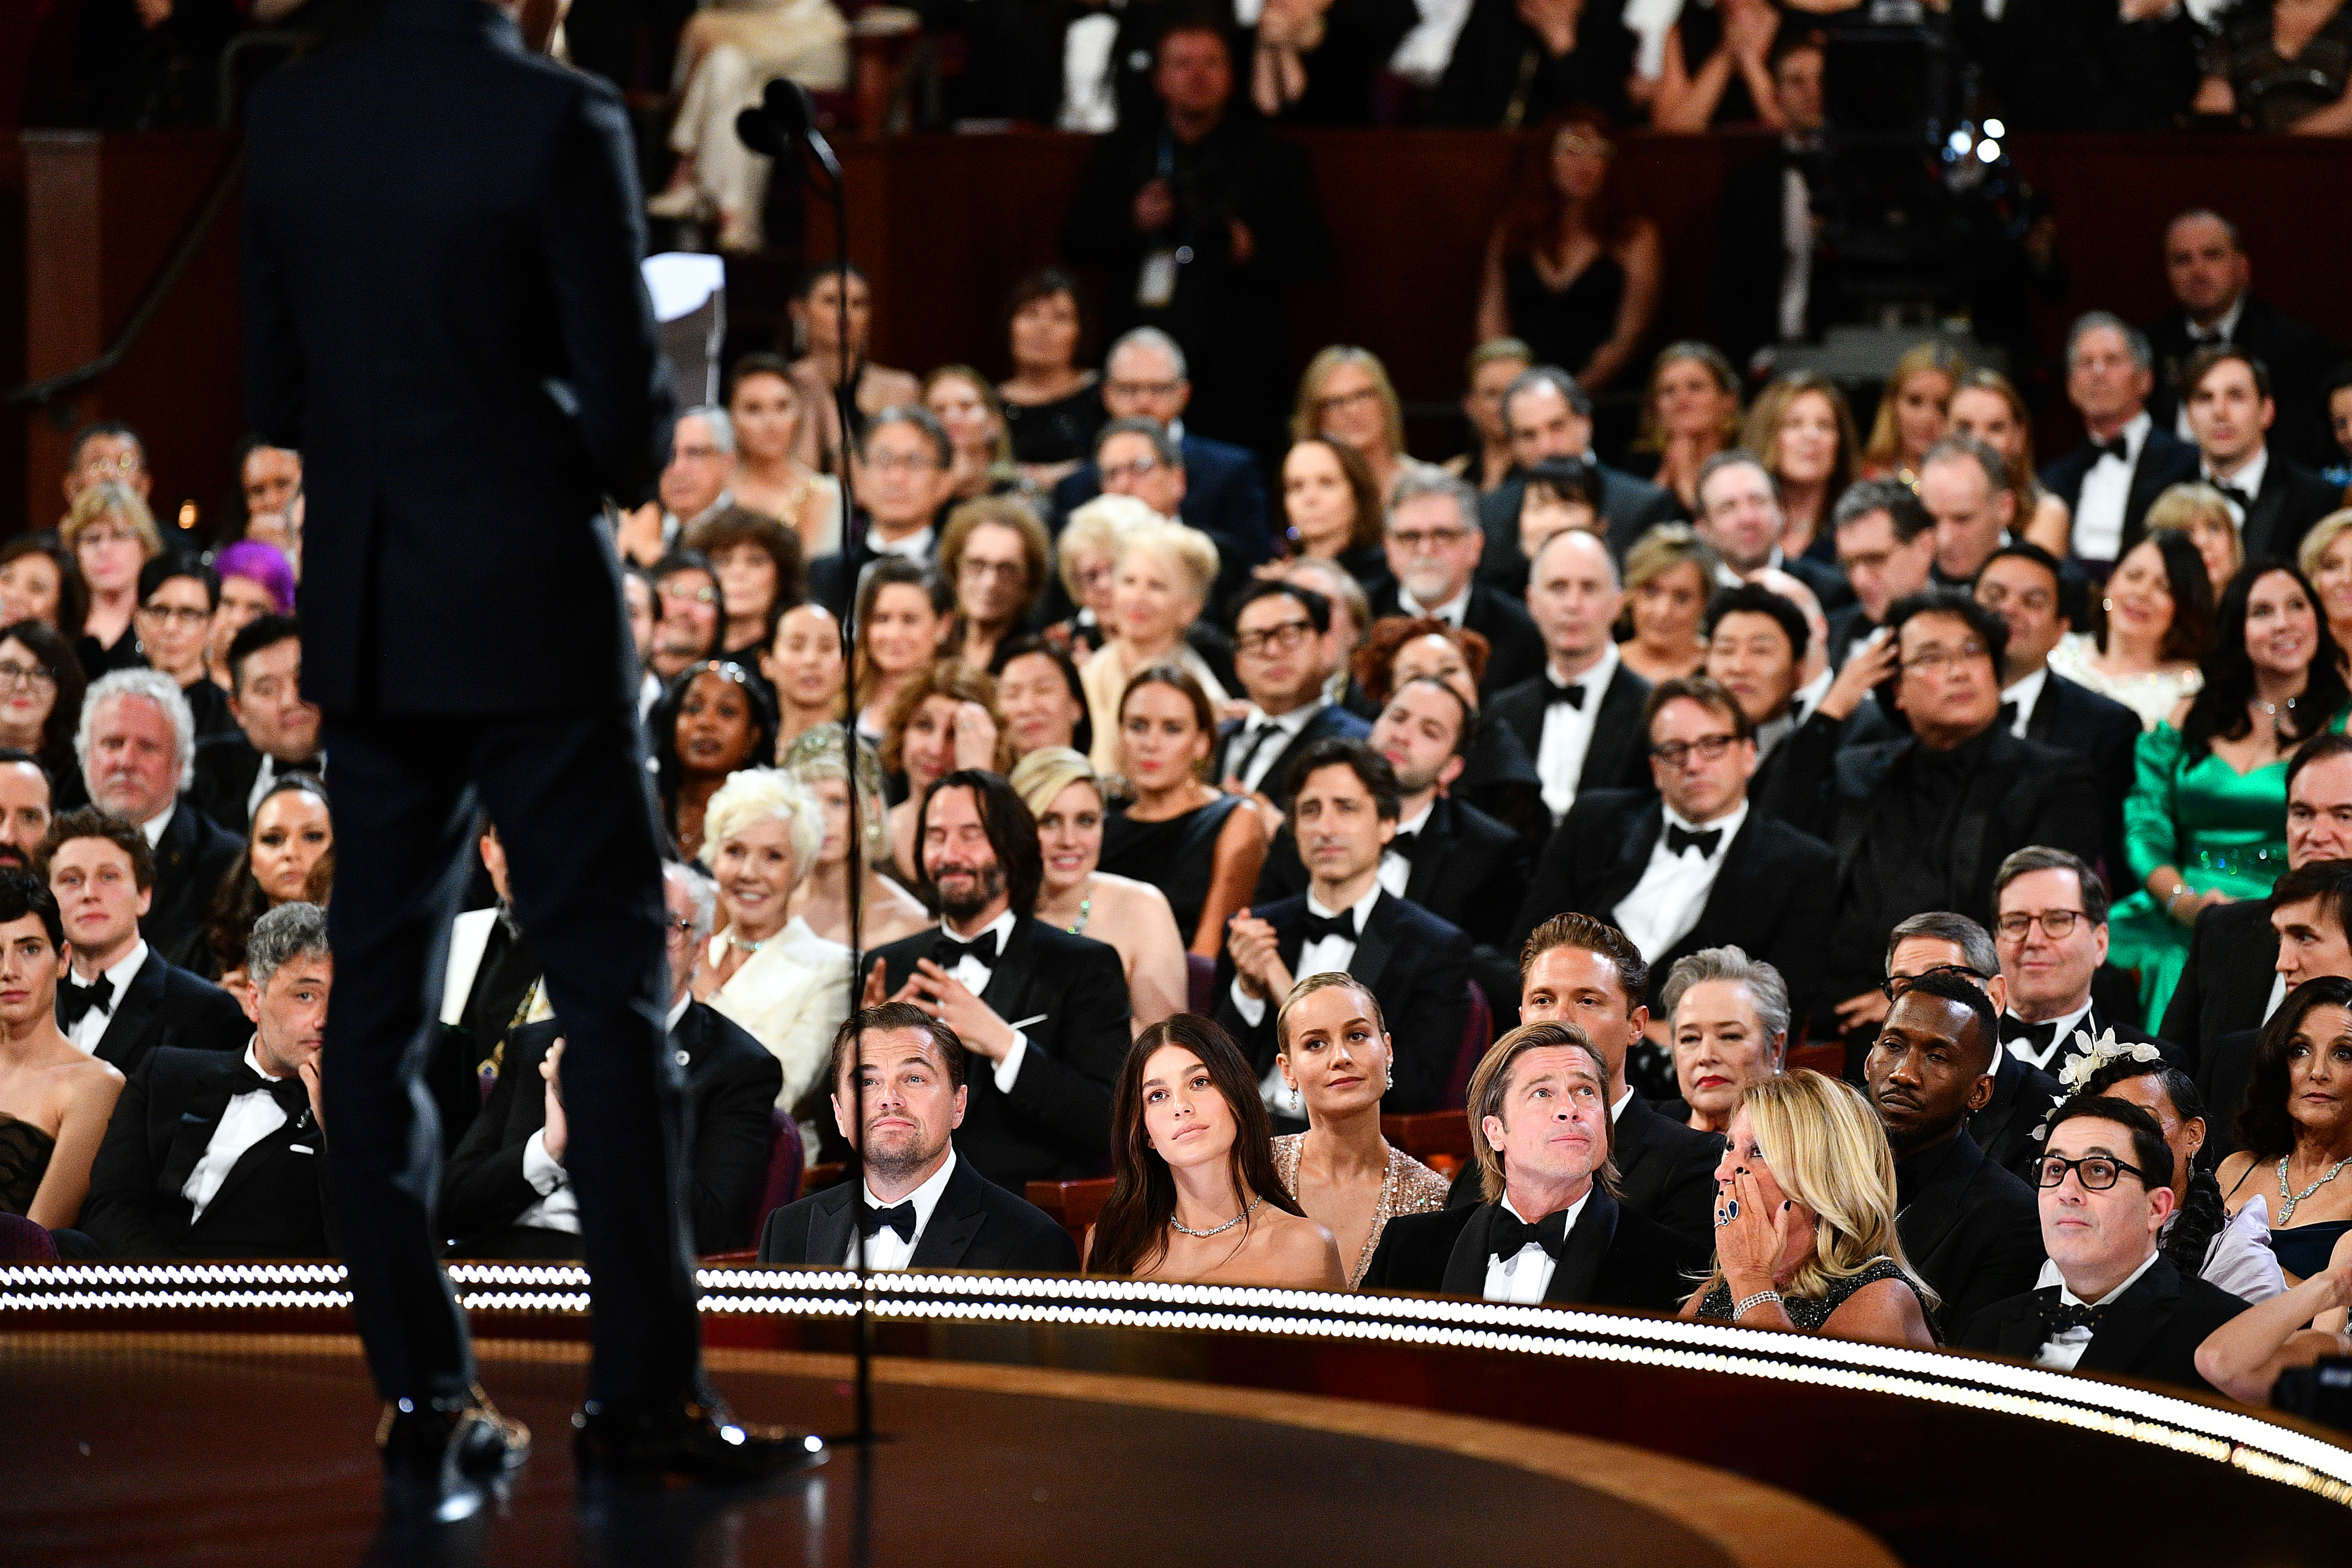 Leonardo DiCaprio, Brie Larson, Brad Pitt, Kathy Bates, and others, 2020 | Source: Getty Images